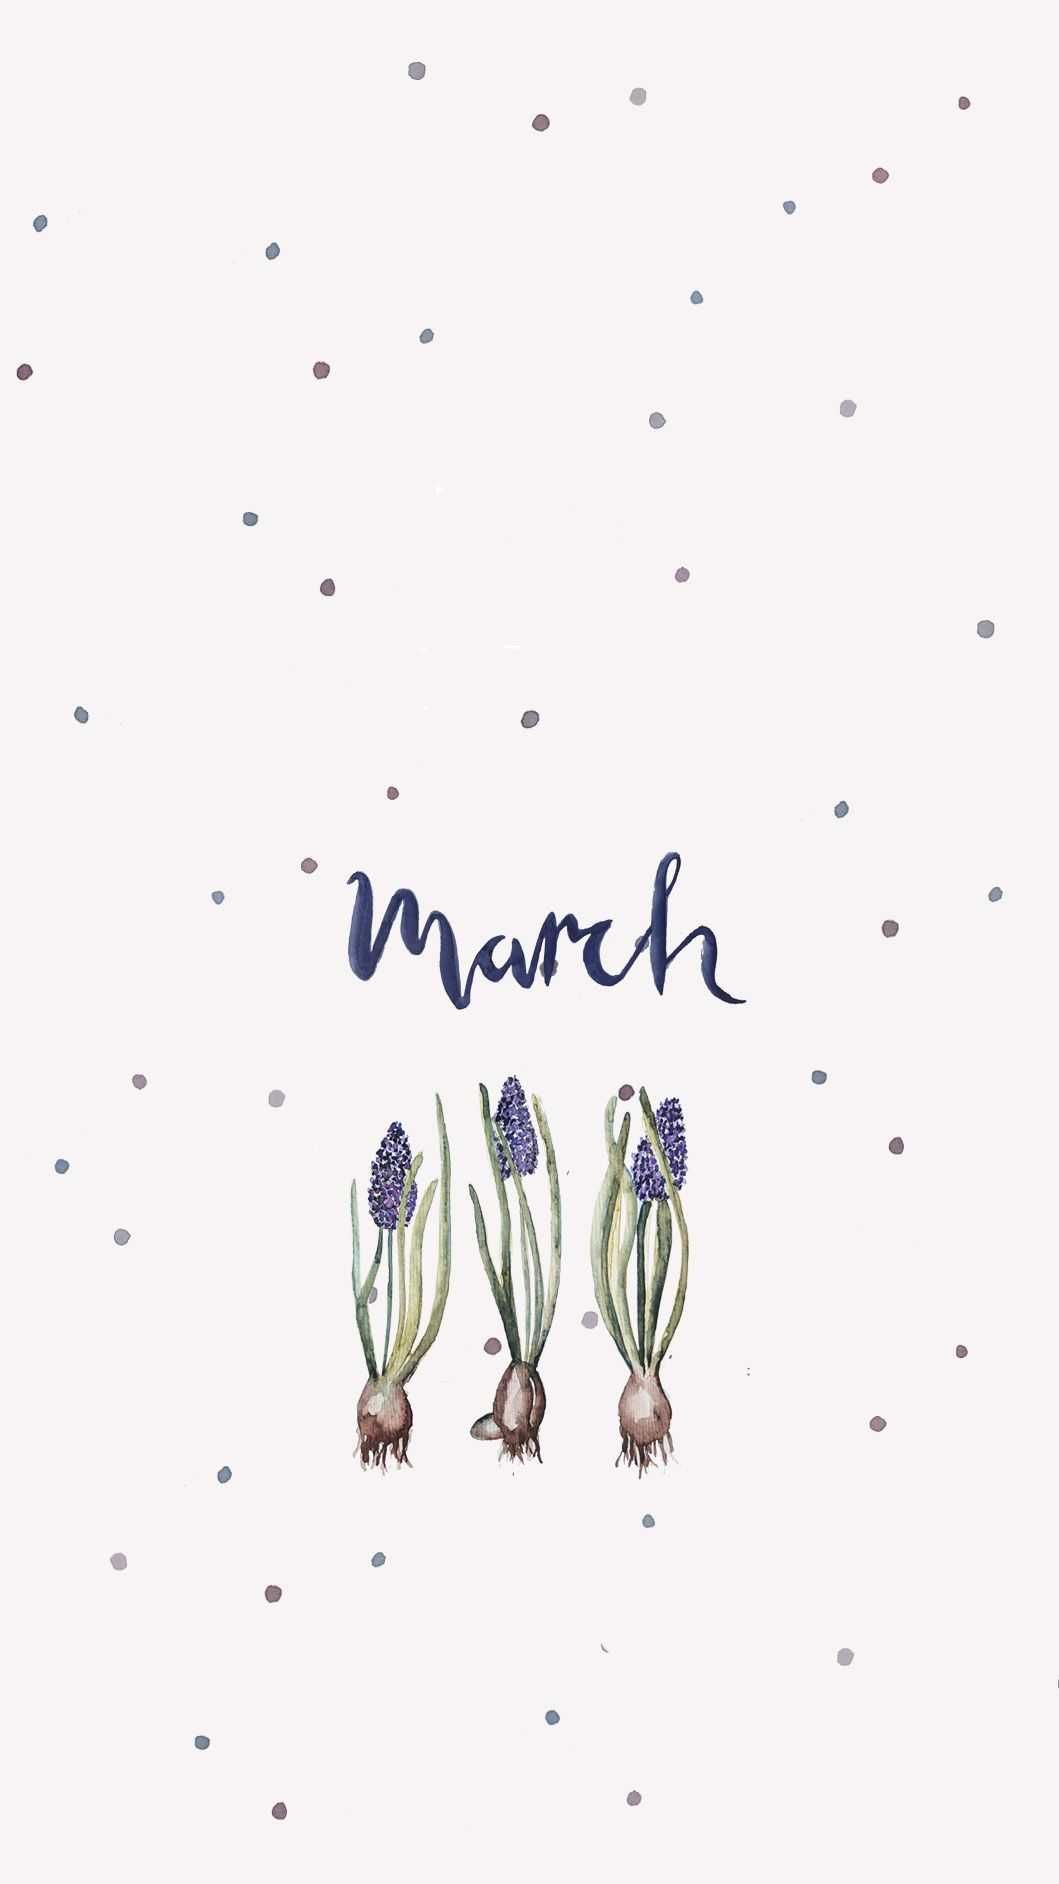 March Wallpaper Browse March Wallpaper with collections of Calendar, Cute, Desktop, iPhone, March.. Calendar wallpaper, February wallpaper, Spring wallpaper